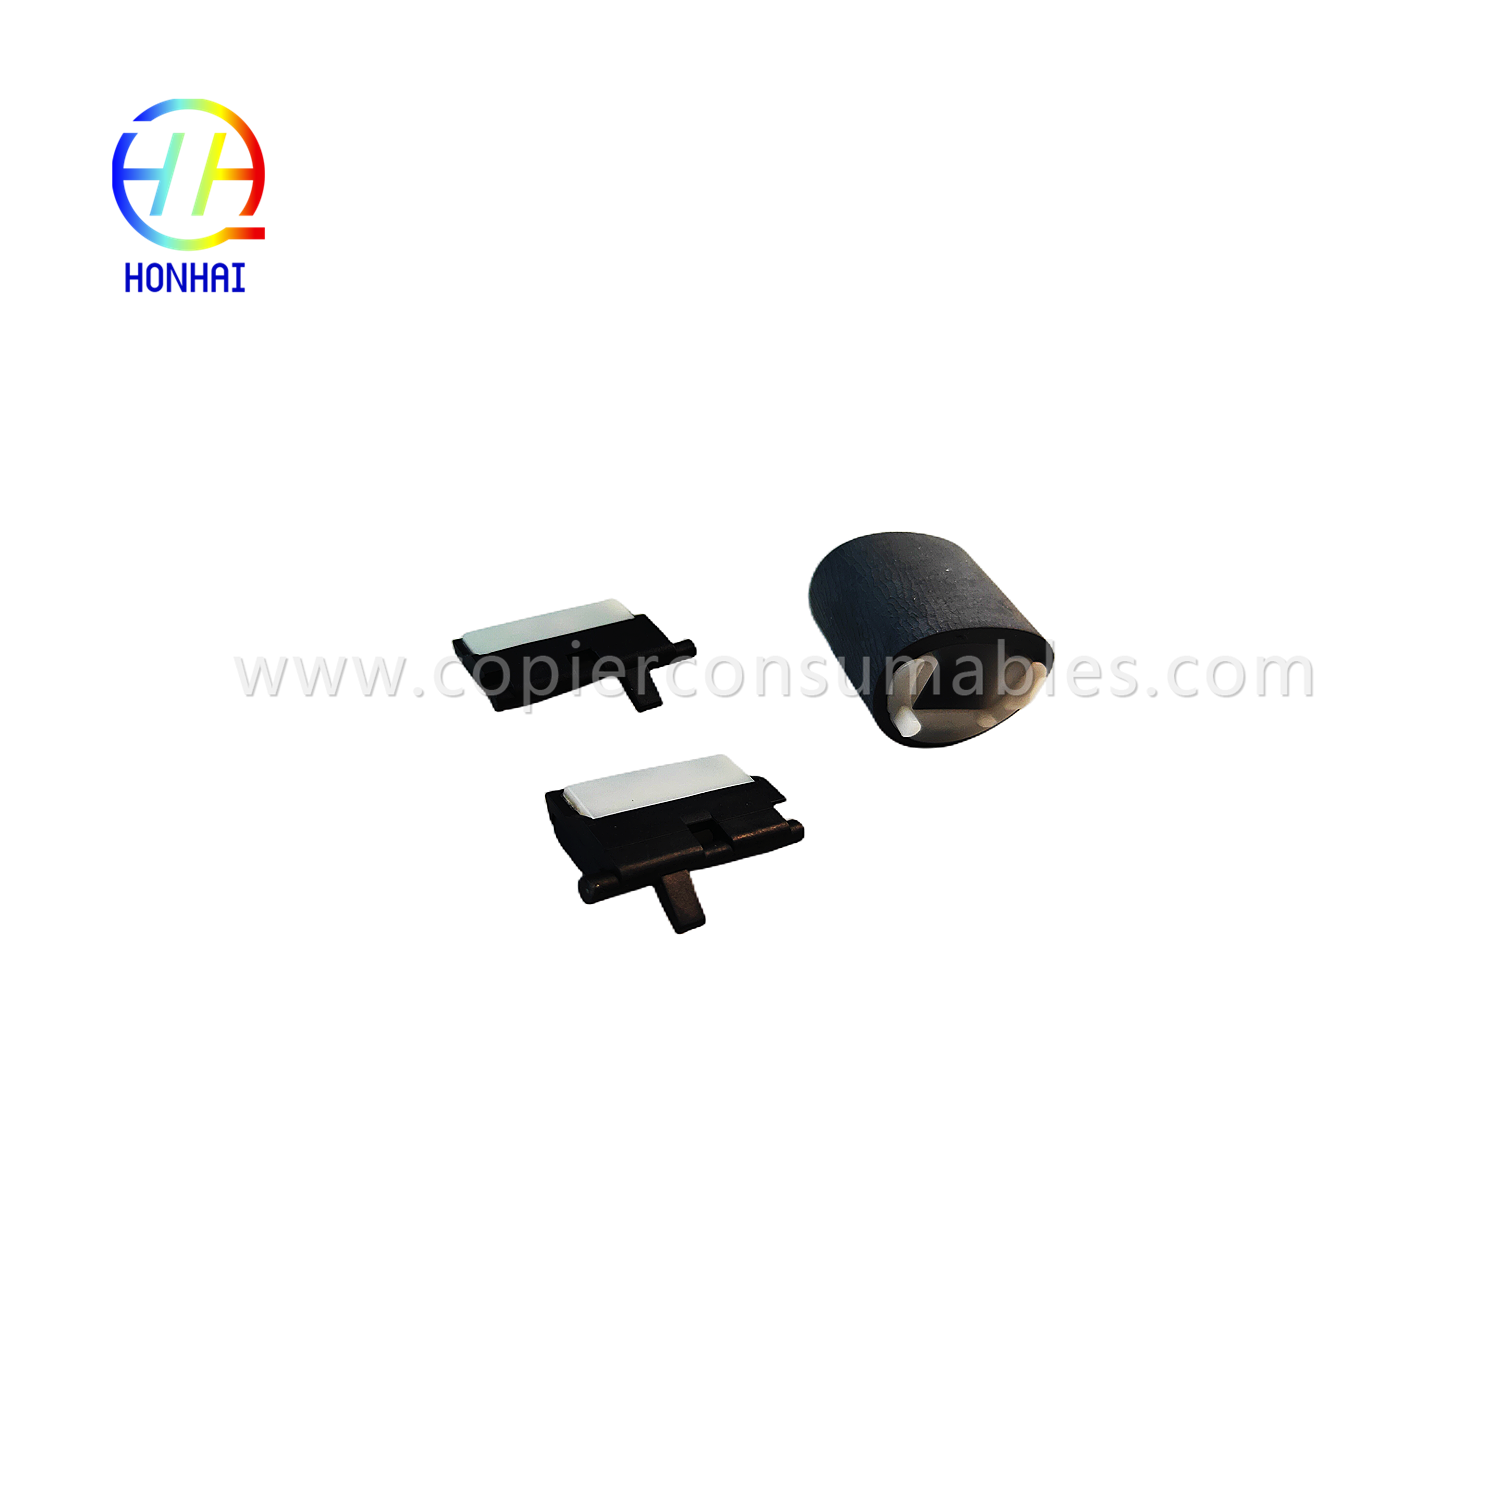 https://www.copierconsumables.com/paper-pickup-roller-separates-pad%ef%bc%88set%ef%bc%89for-hp-pagewide-x585z-x451dn-x476dn-x551dw-x576dw-556dn-56 452dn-477dn-552-577z-cb780-60012-product/